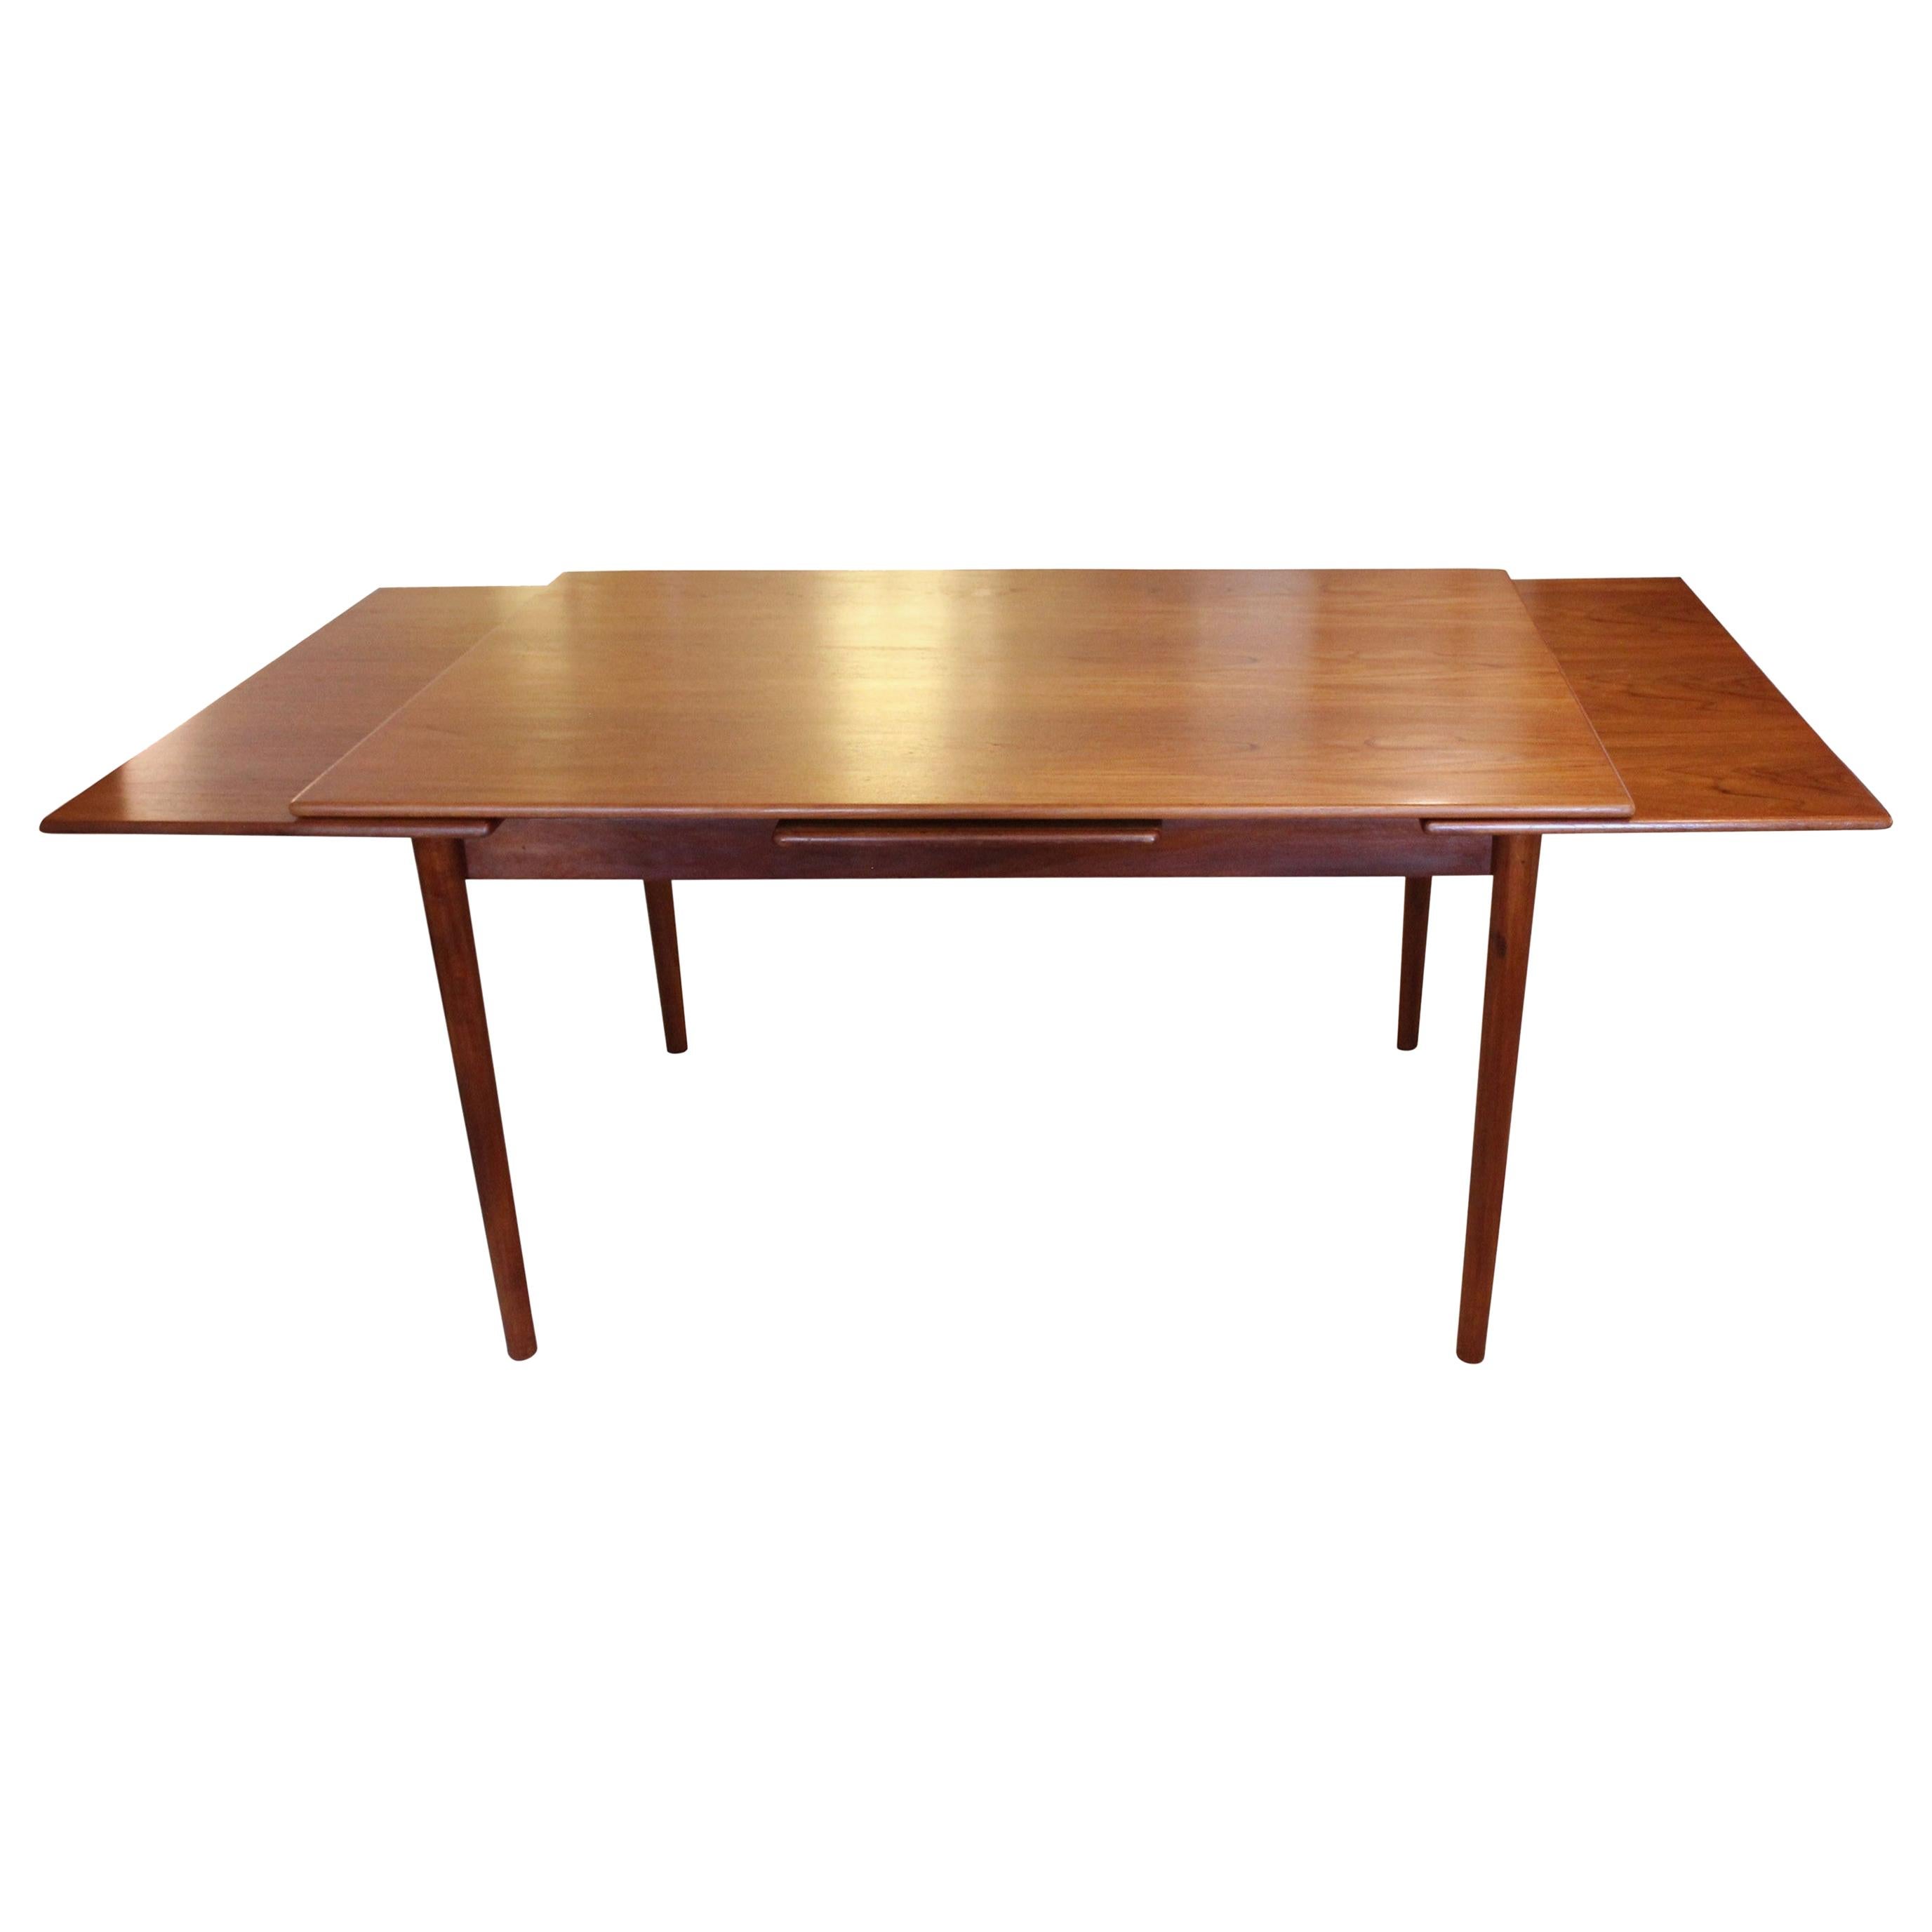 Dining Table with Extentions in Teak of Danish Design from the 1960s